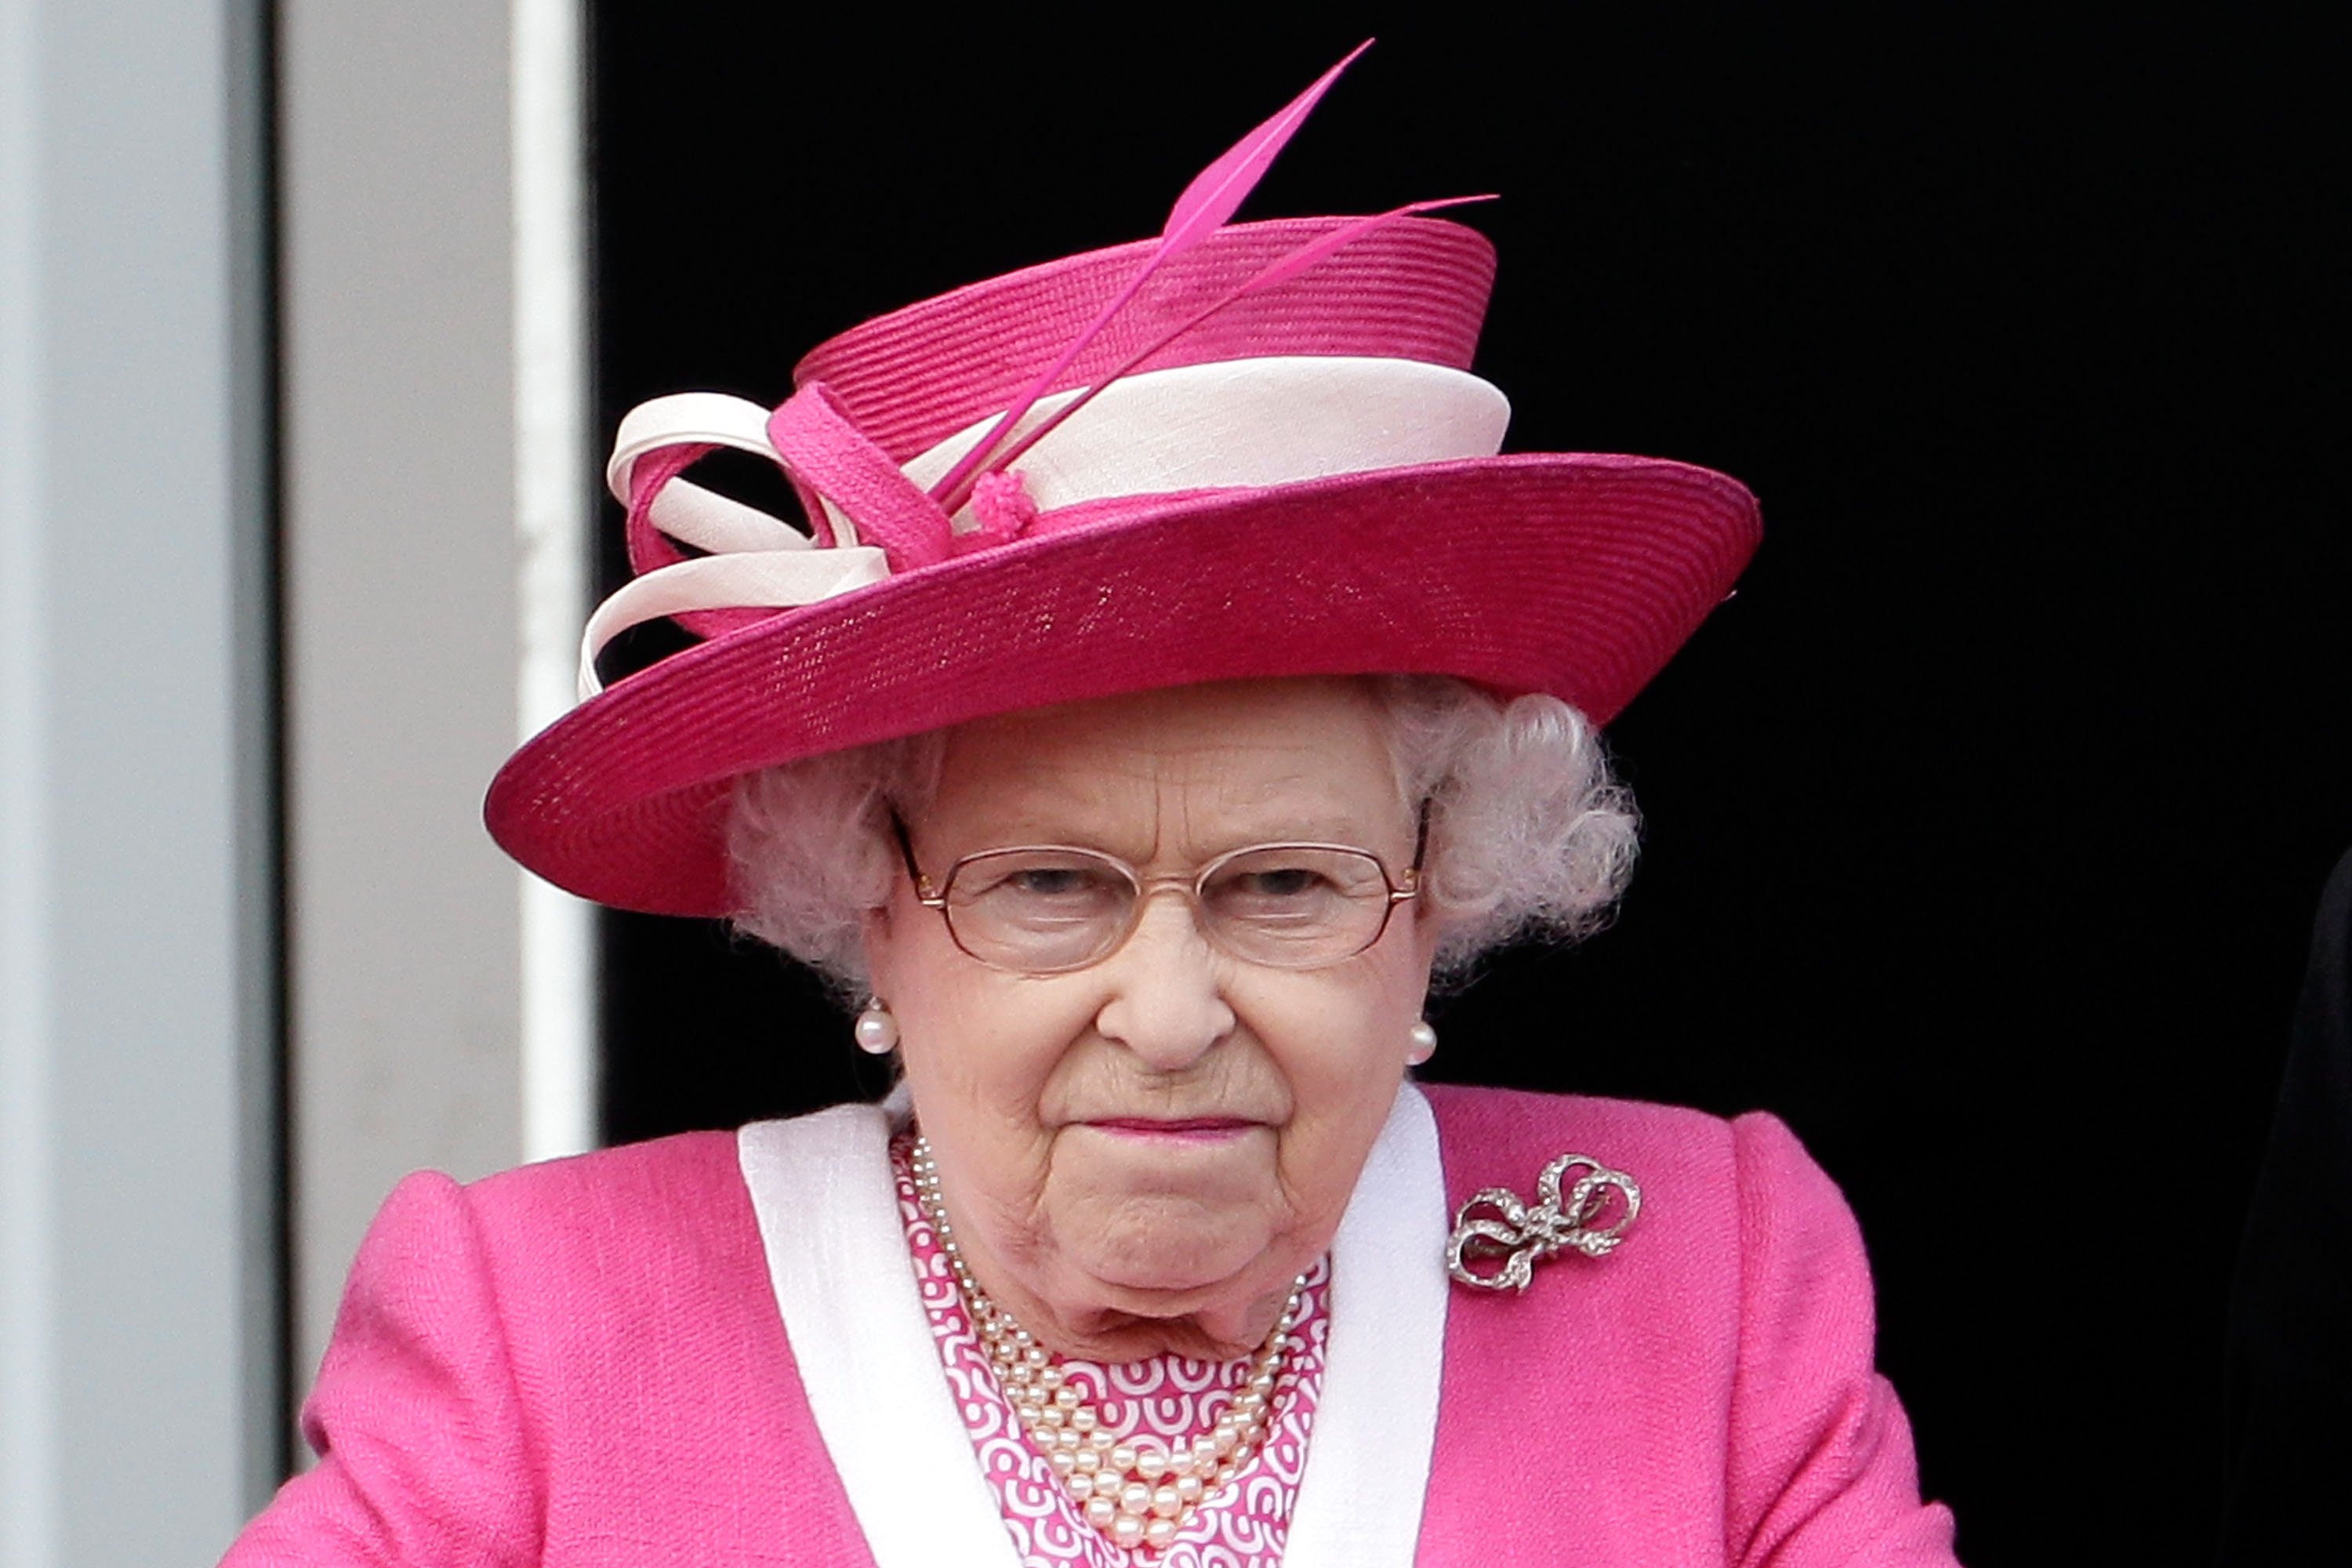 Queen Elizabeth II at Epsom Downs racecourse on June 4, 2011 | Photo: Getty Images